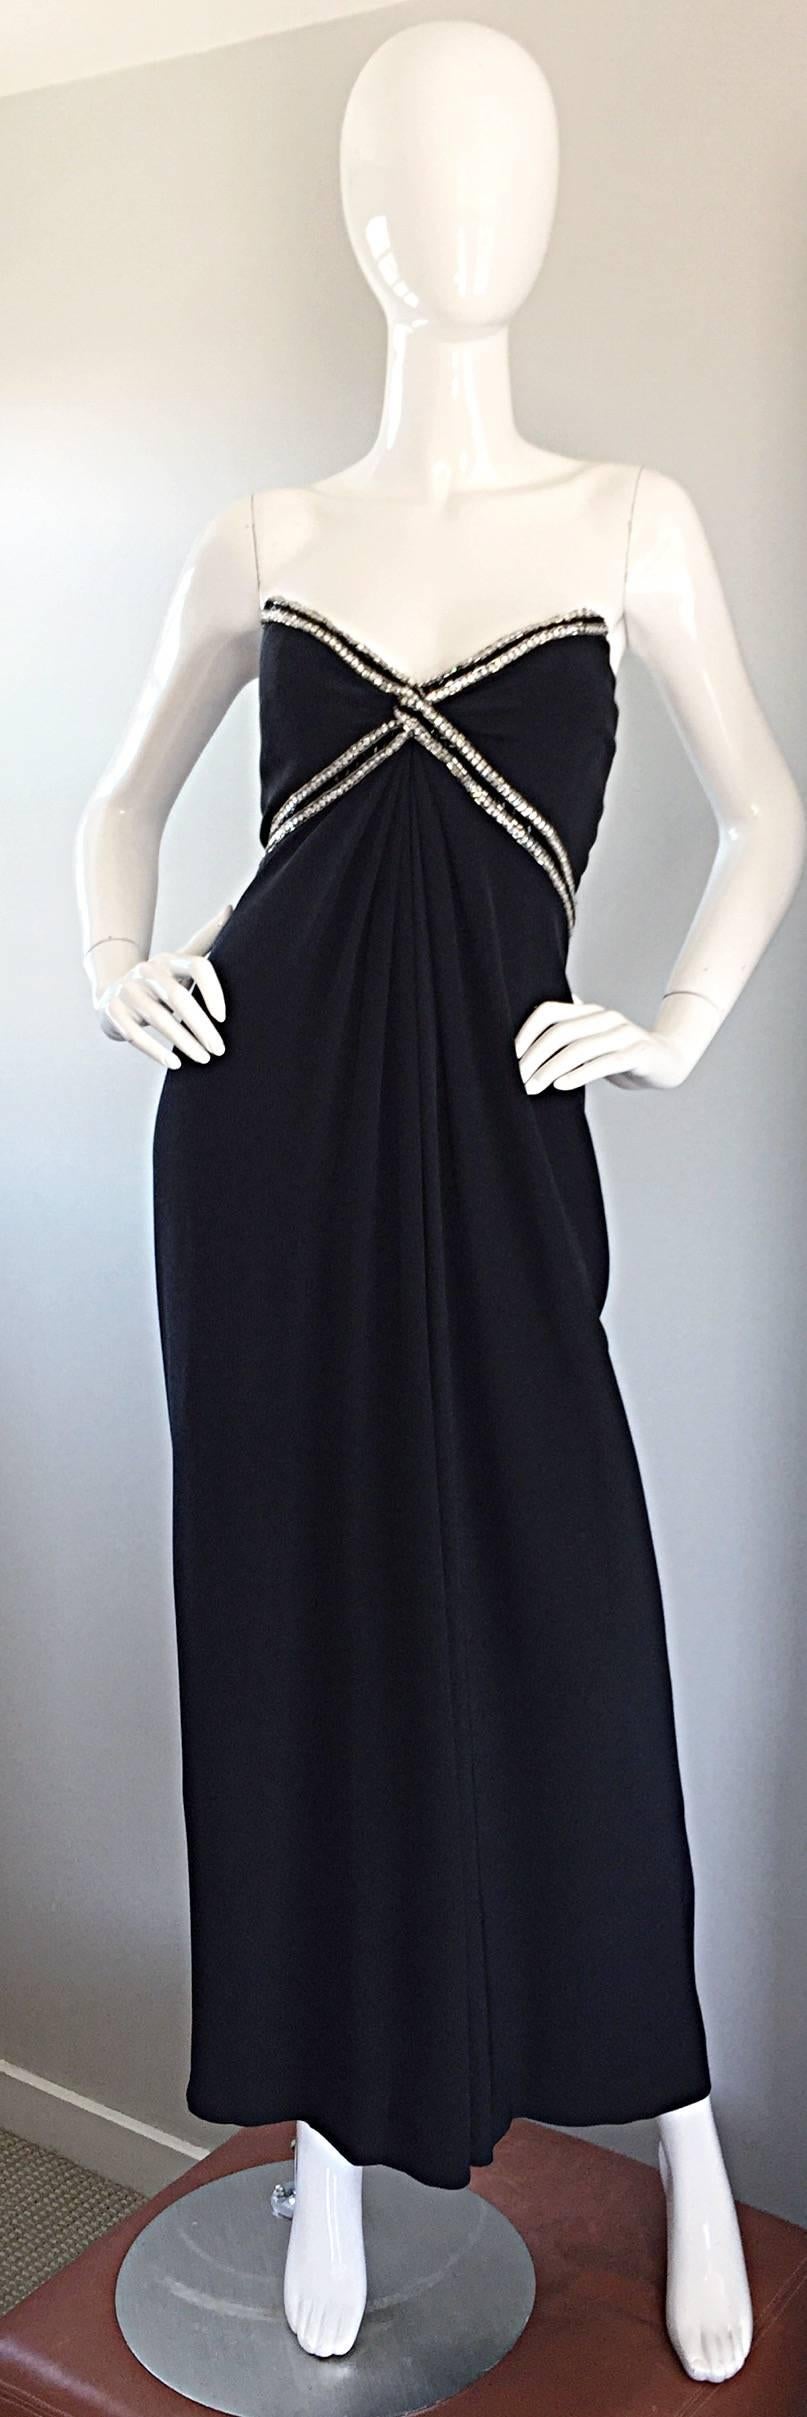 Simply stunning vintage BOB MACKIE for AMEN WARDY black strapless full length silk jersey gown! Features hundreds of hand-sewn rhinestones along the bust and waist. Draping at the waist gives the dress a chic Grecian feel. Super flattering fit, with